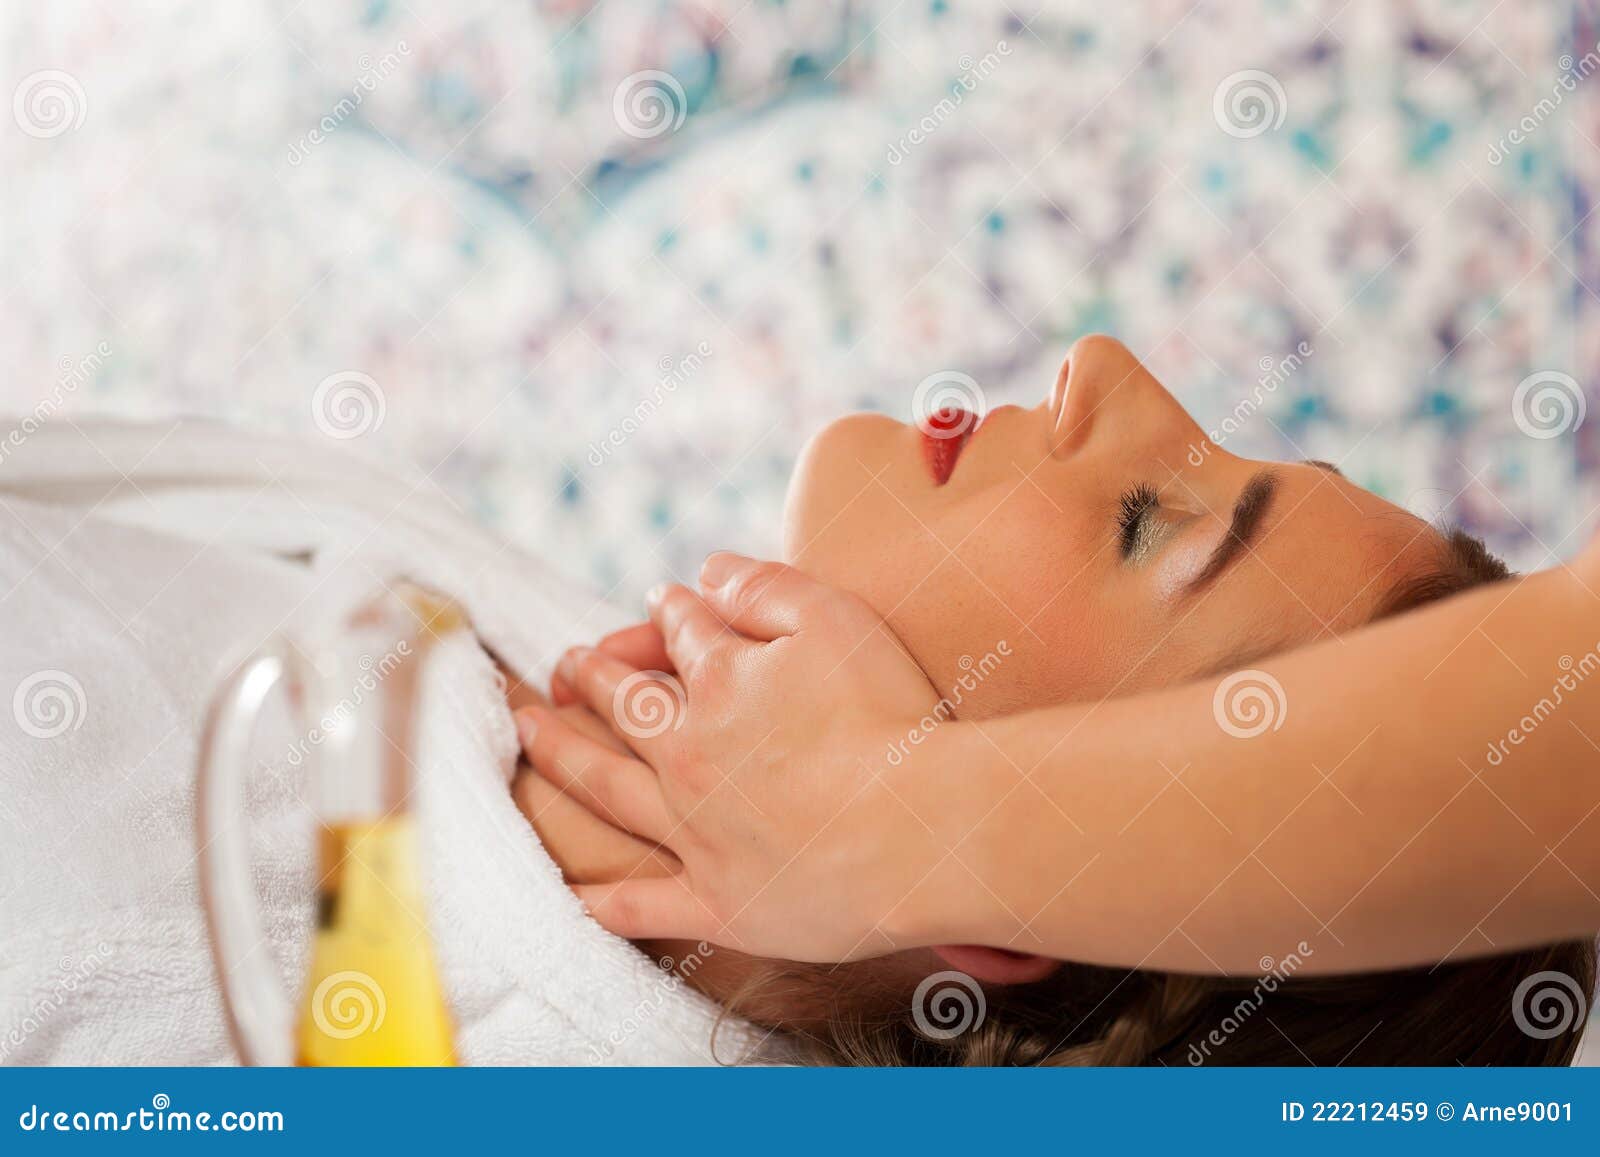 Wellness Woman Getting Head Massage In Spa Stock Image Image Of Masseuse Massager 22212459